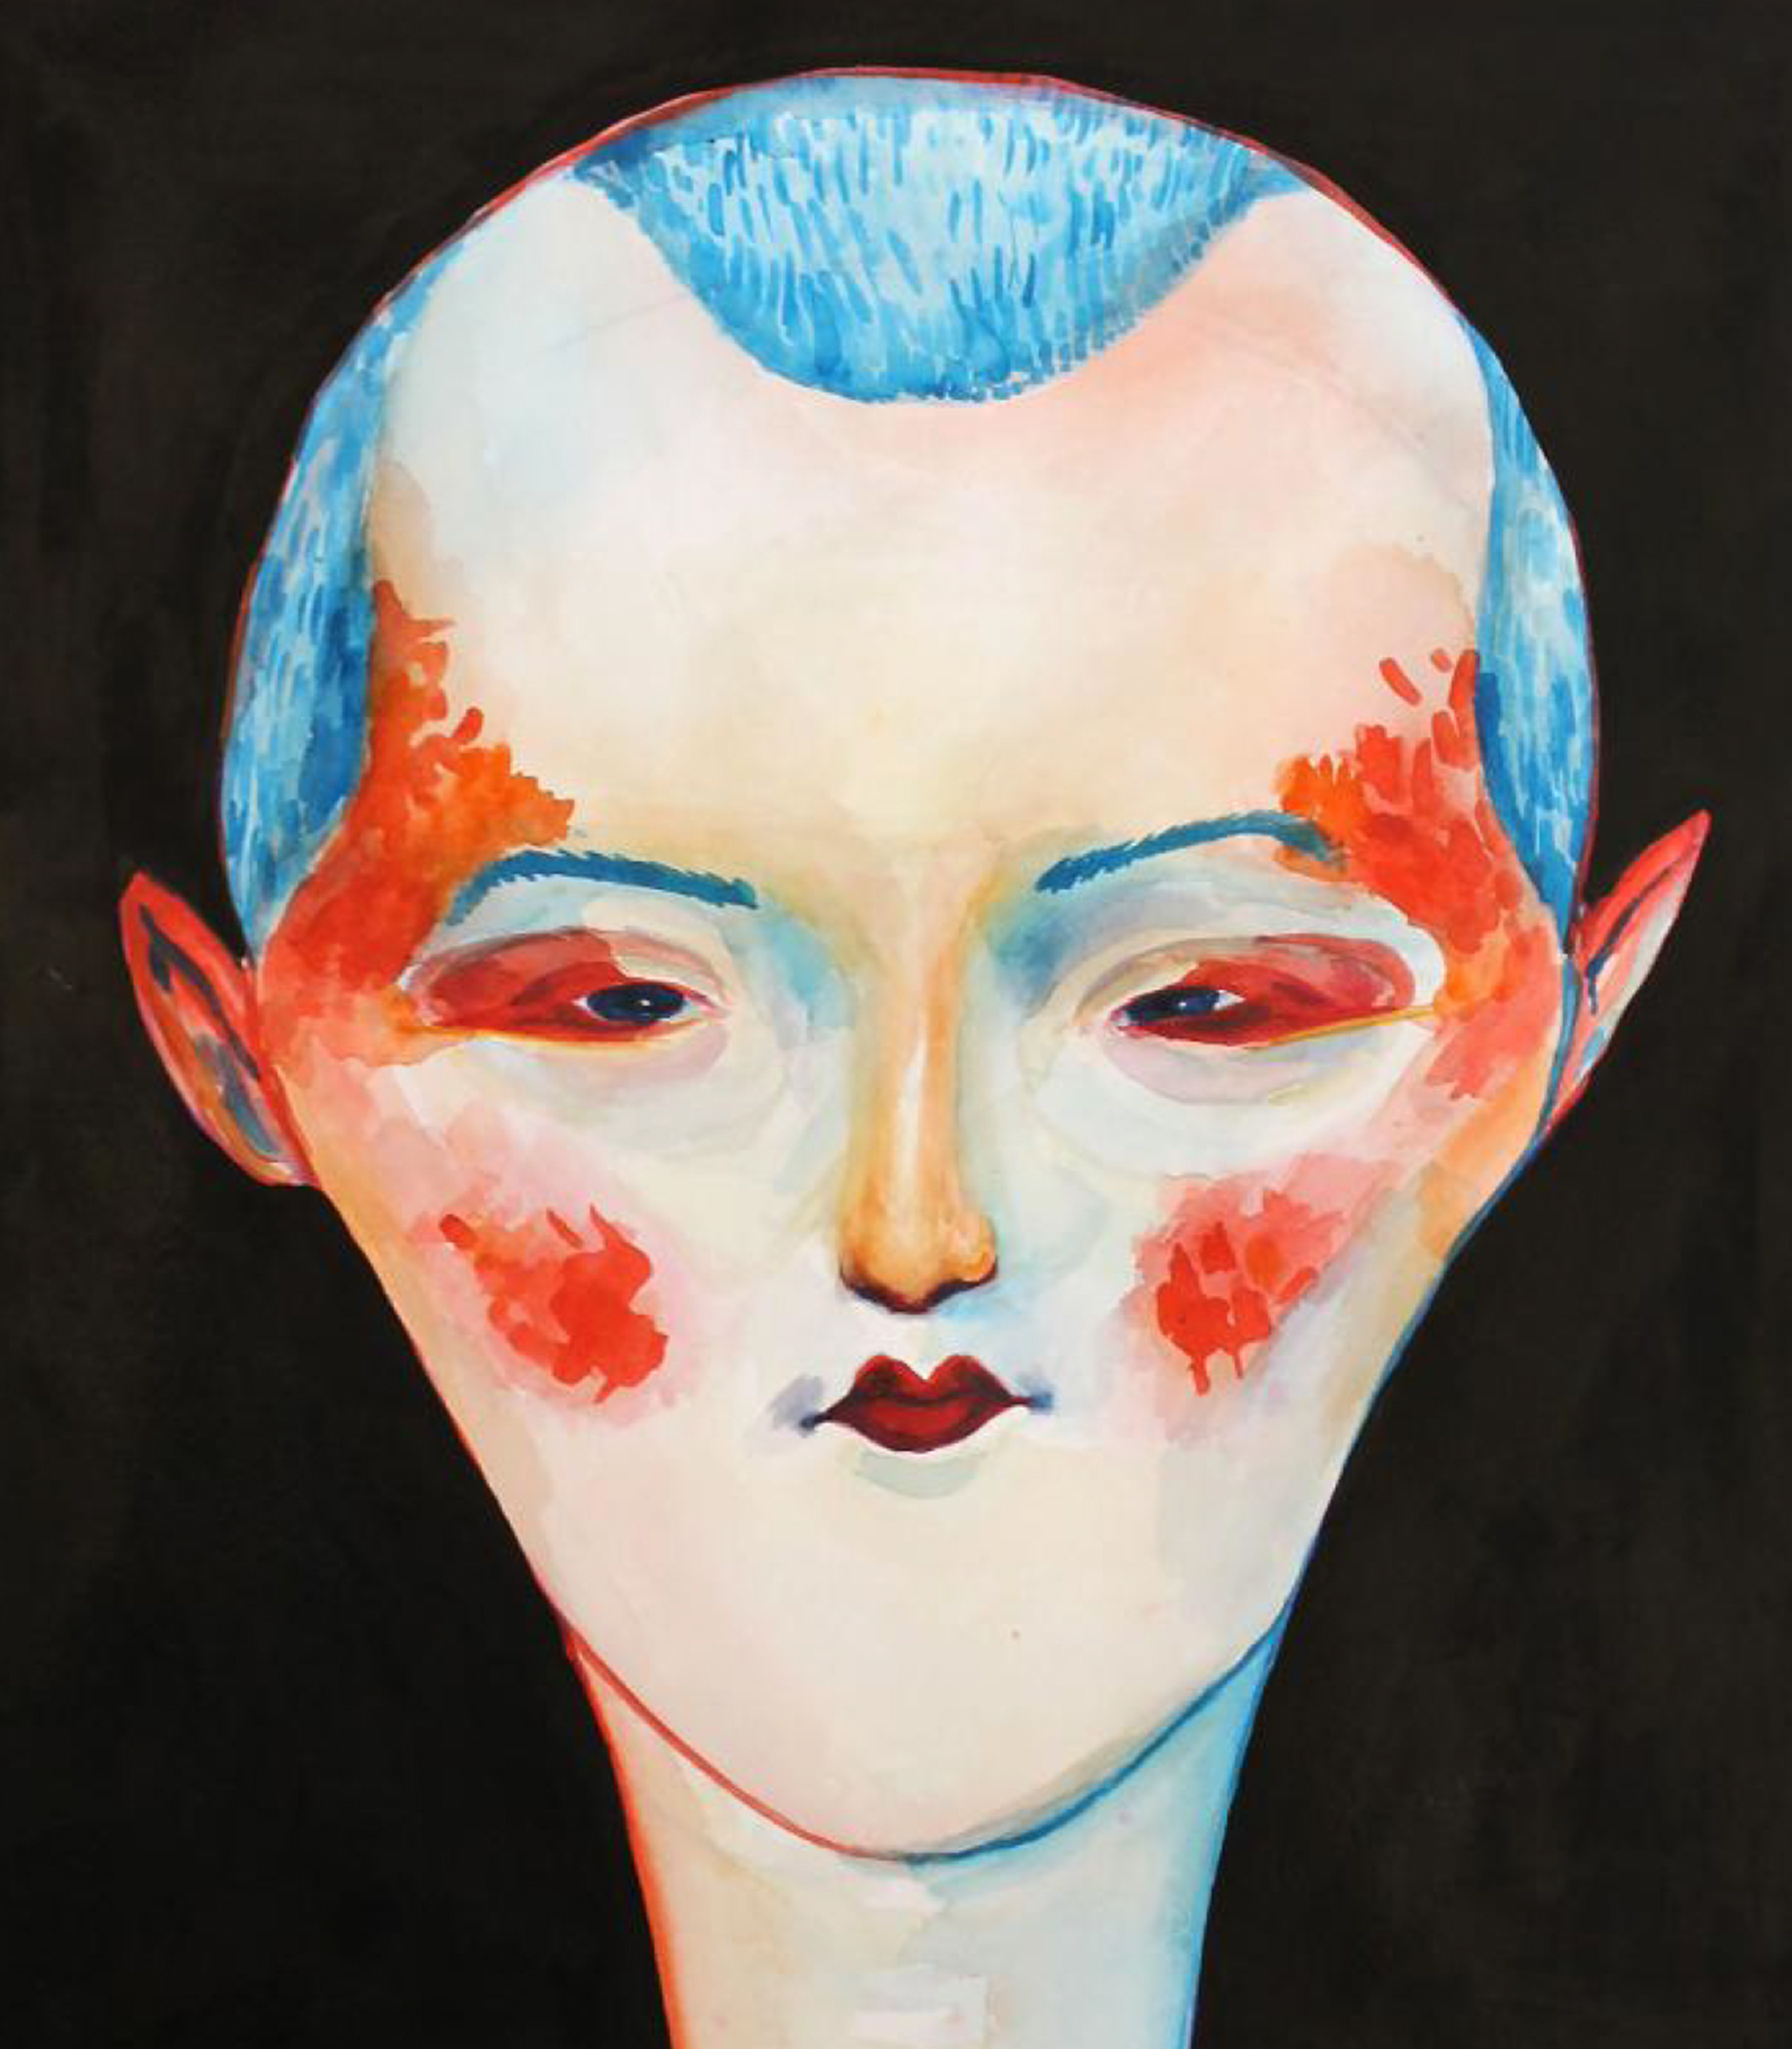 Drawing of a face with splotches of orange and blue hair